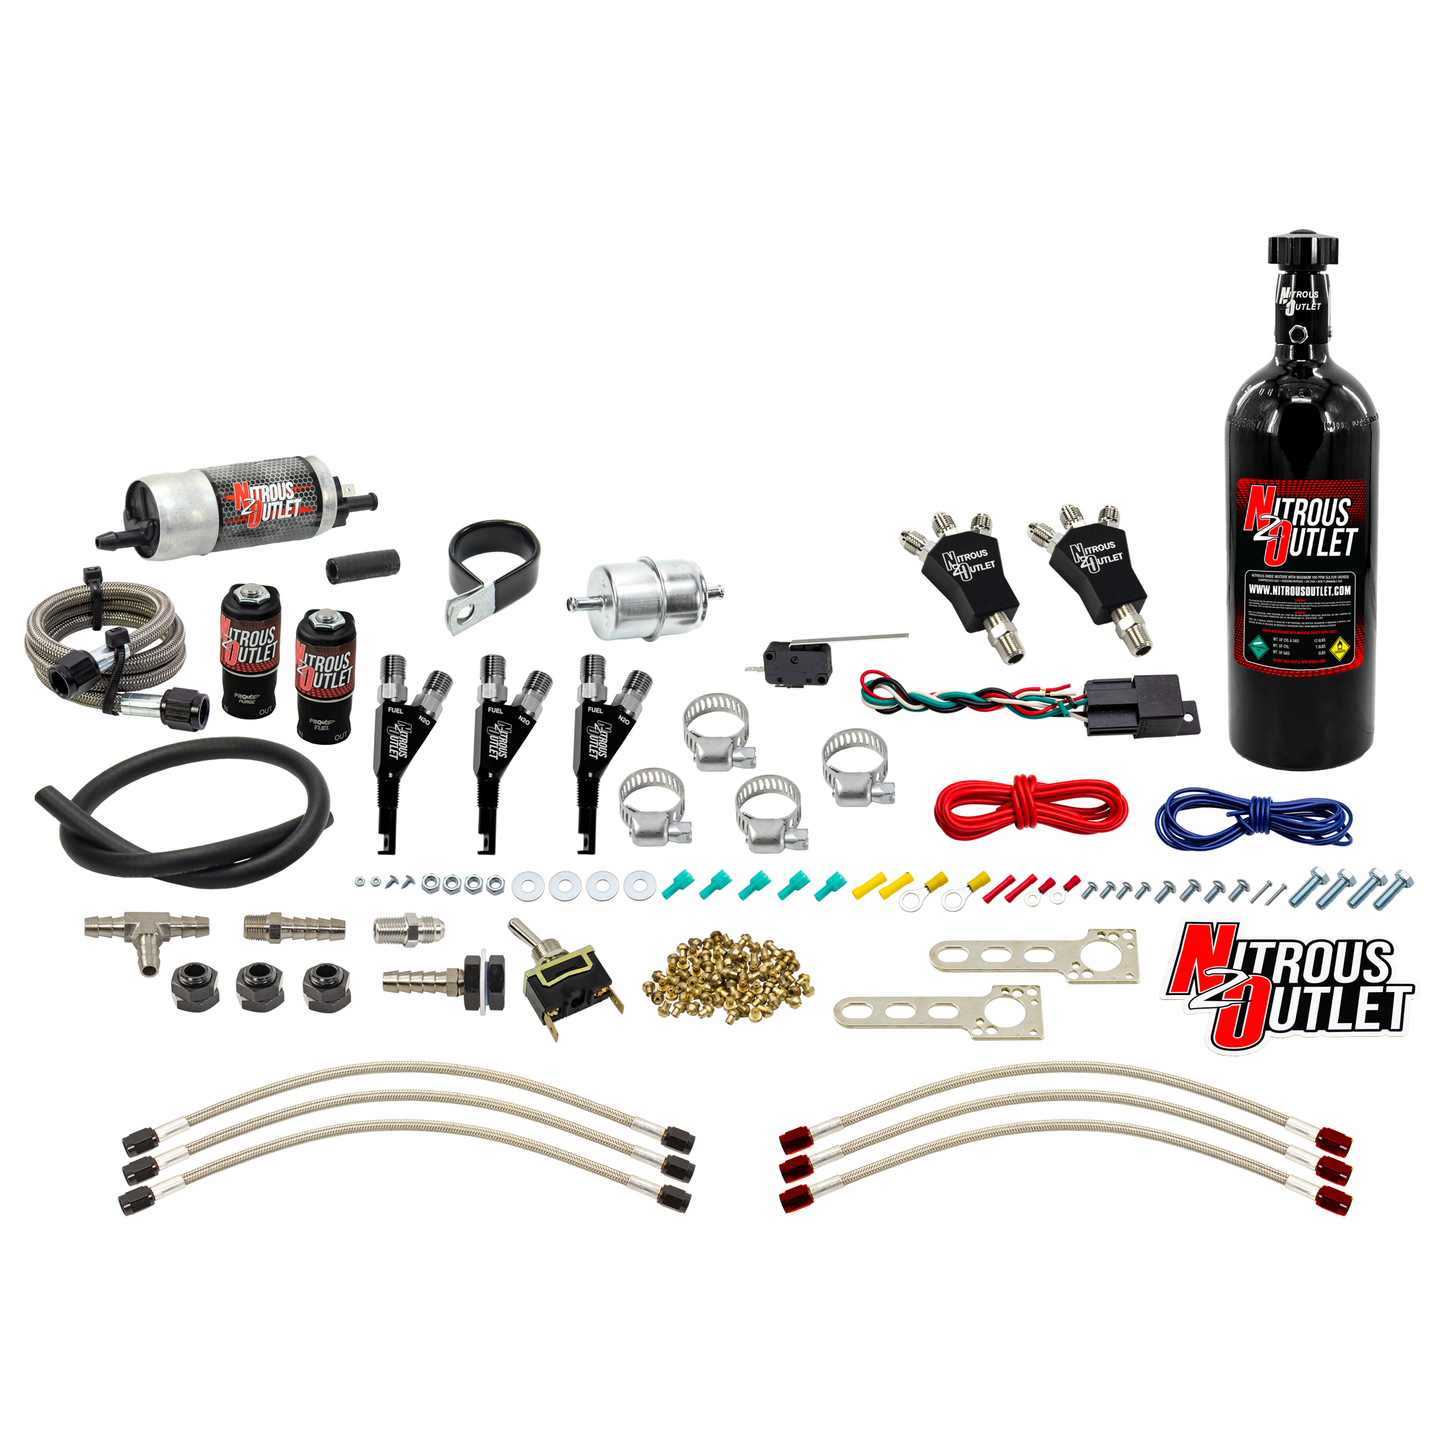 Powersports Carbureted Three Cylinder Nozzle System